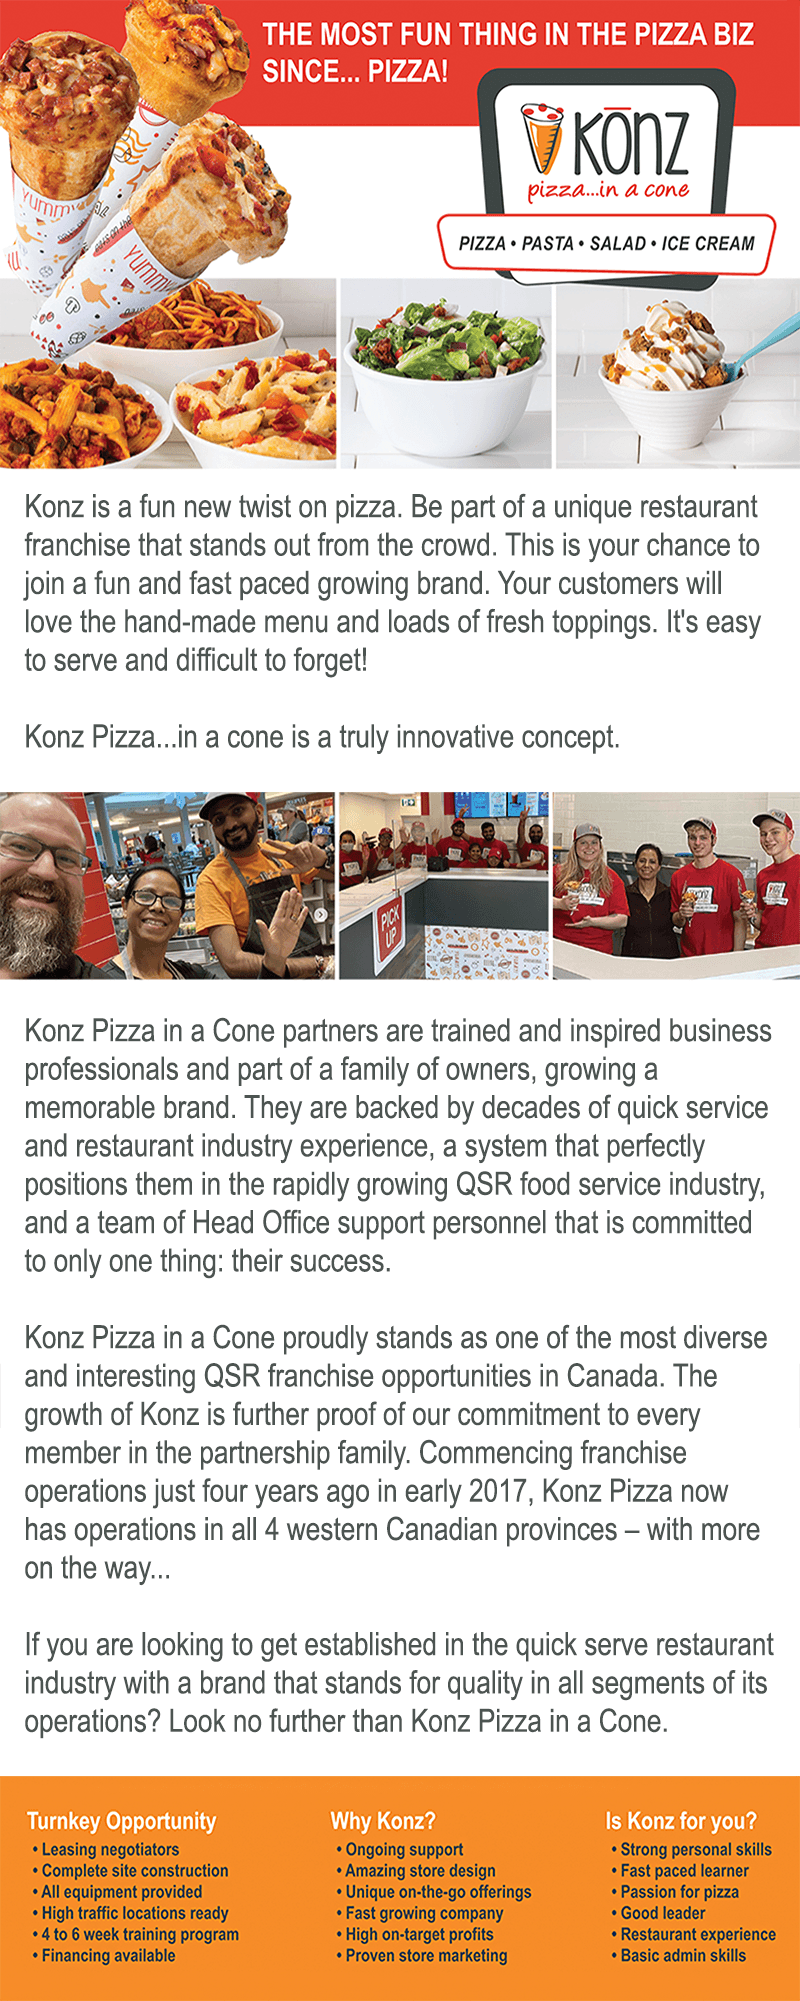 Konz Pizza in a Cone Franchise